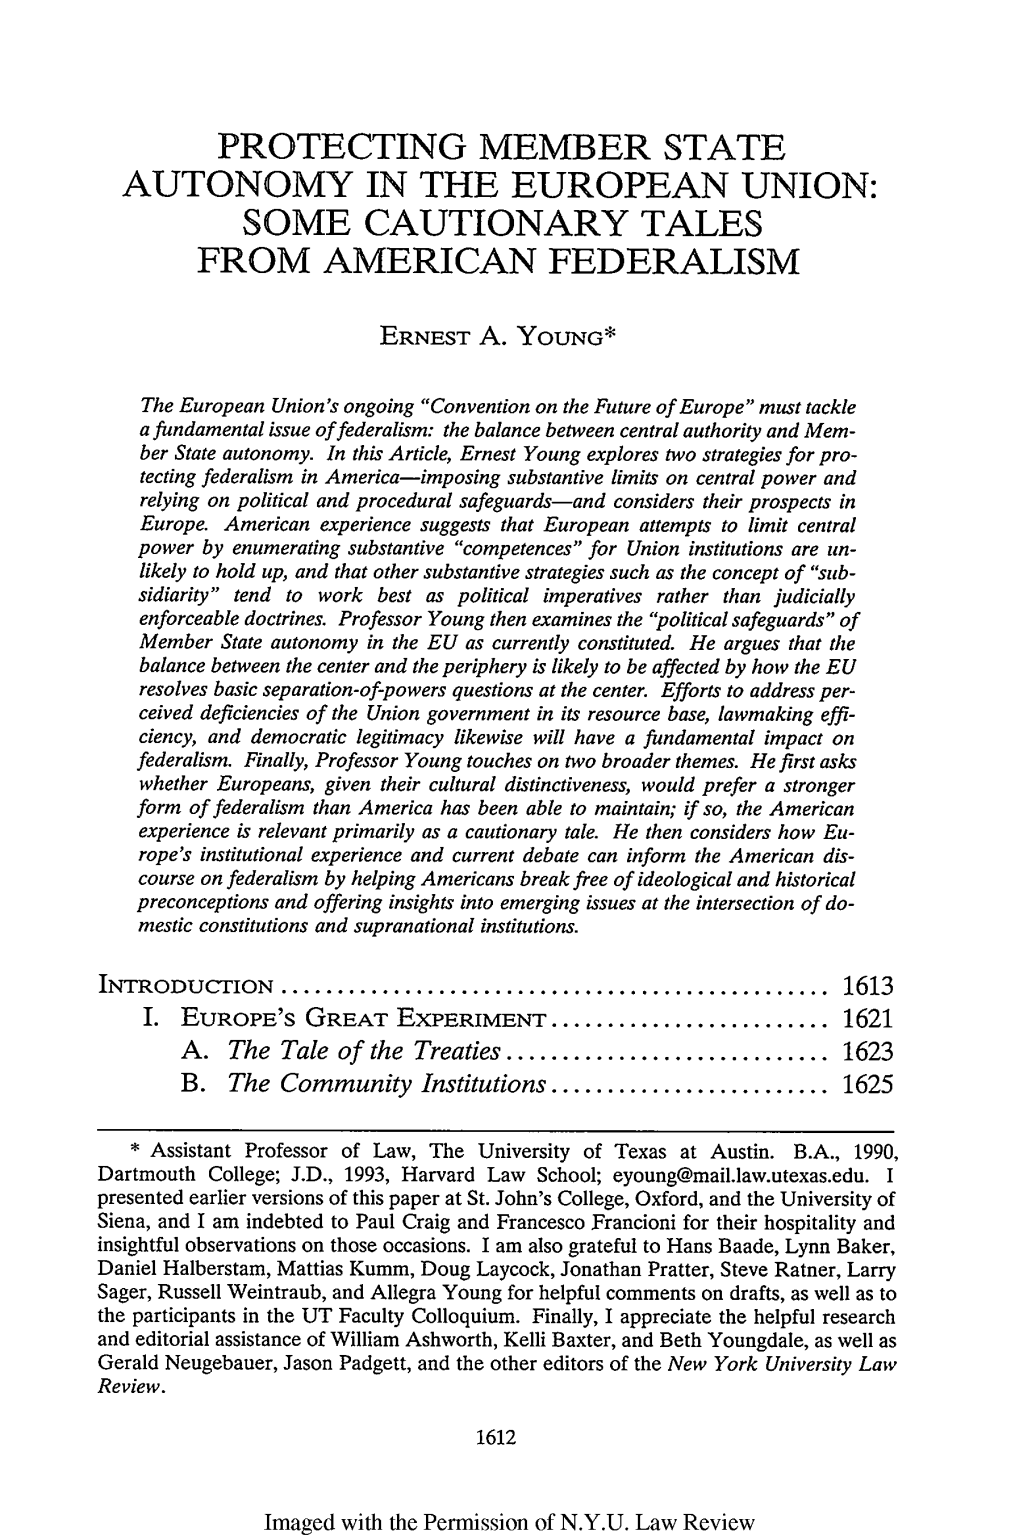 Protecting Member State Autonomy in the European Union: Some Cautionary Tales from American Federalism